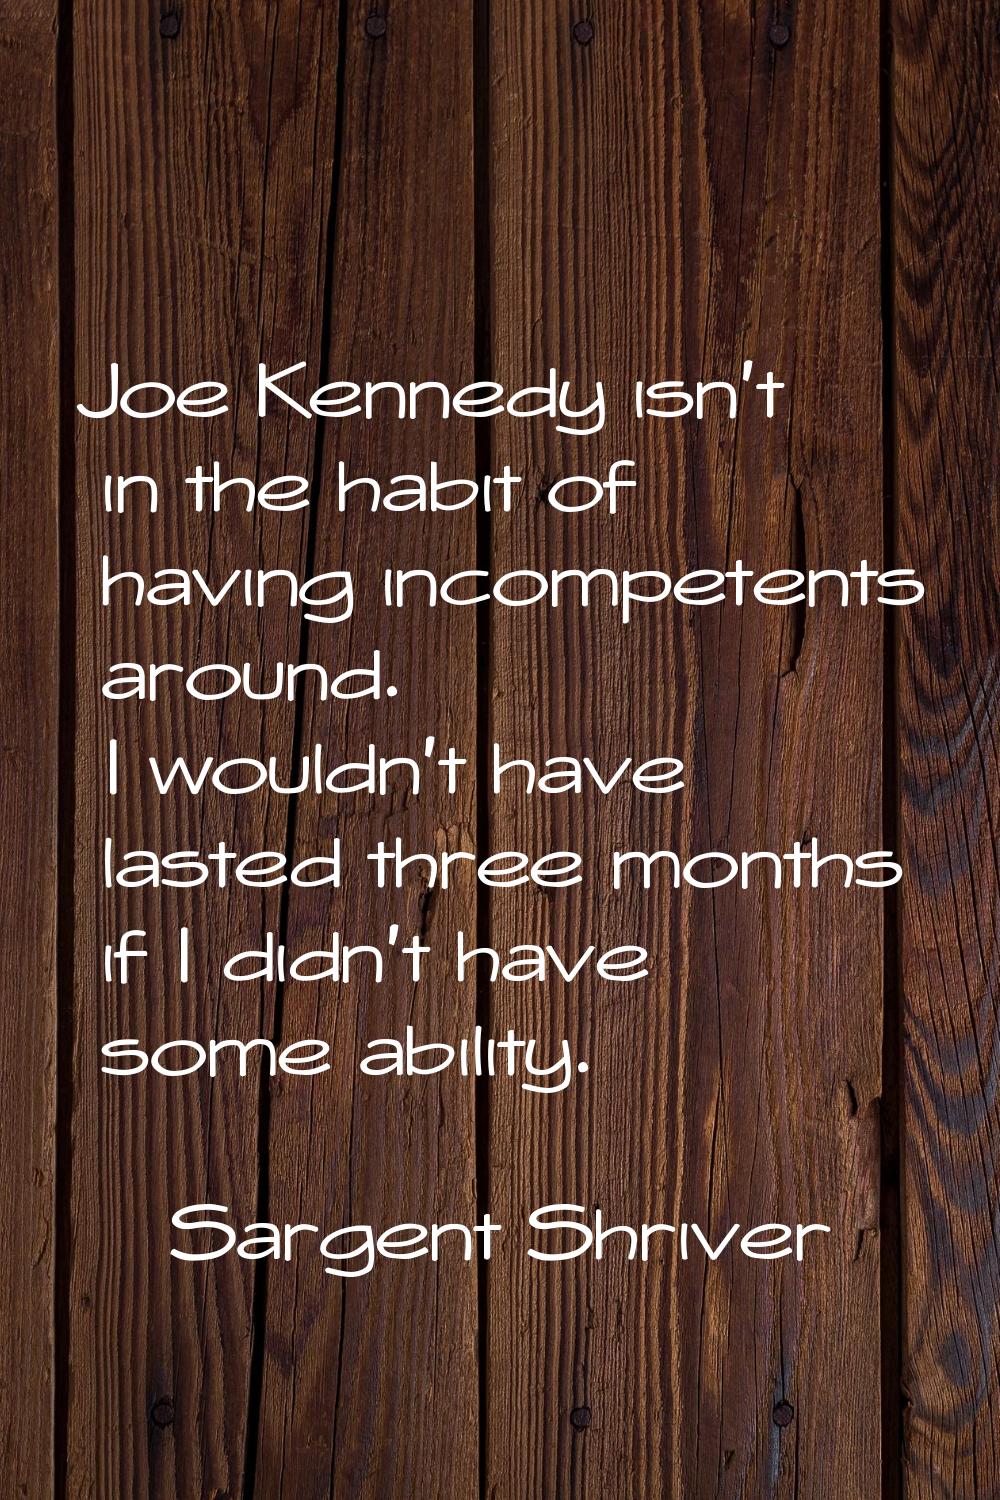 Joe Kennedy isn't in the habit of having incompetents around. I wouldn't have lasted three months i